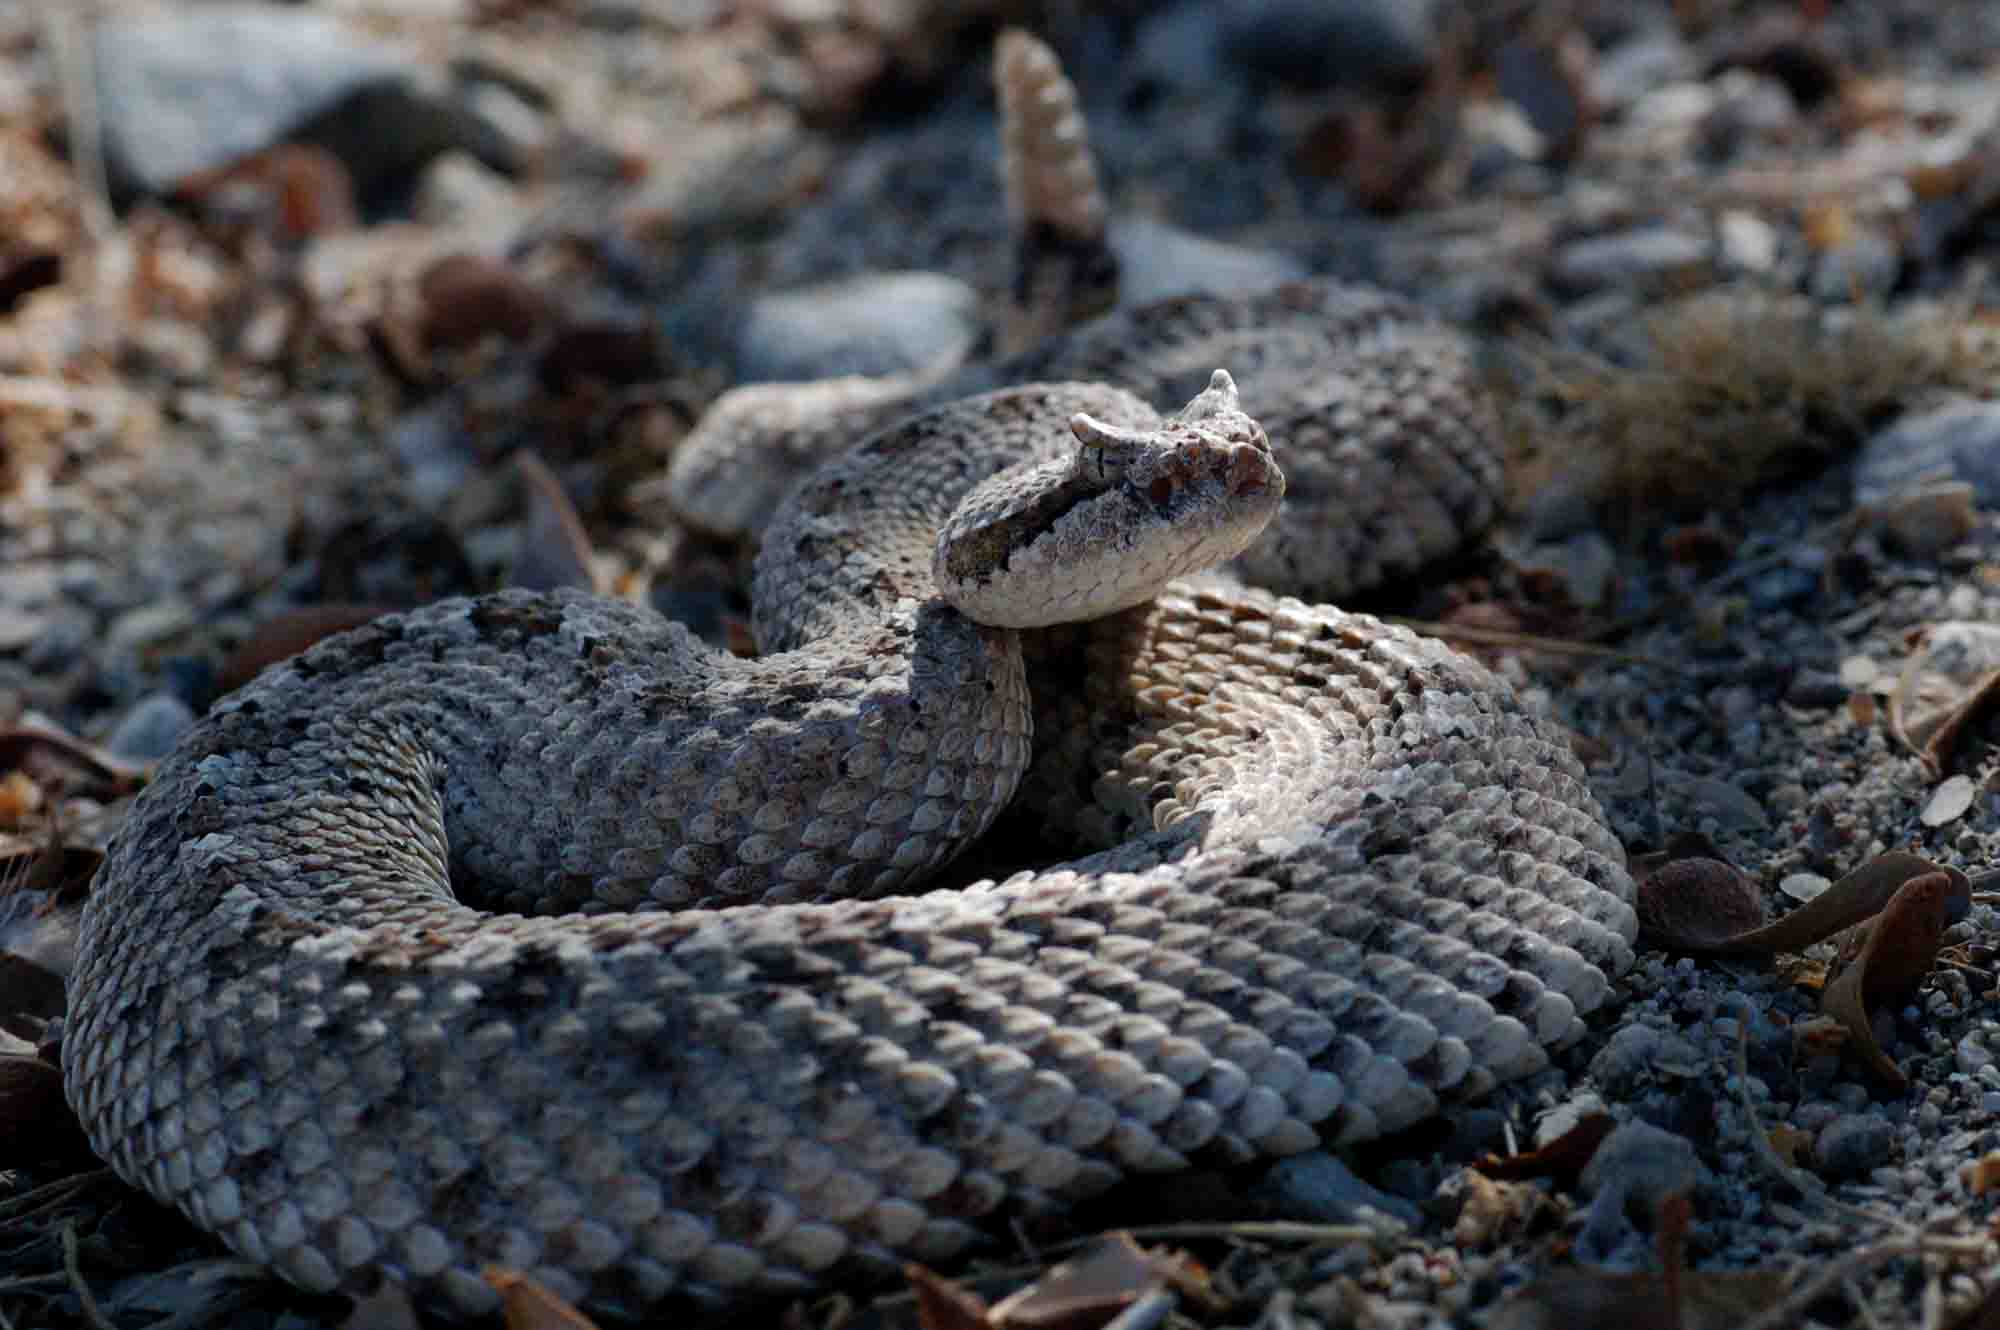 Close up of Australian Common Death Adder snake showing lure at tip of tail